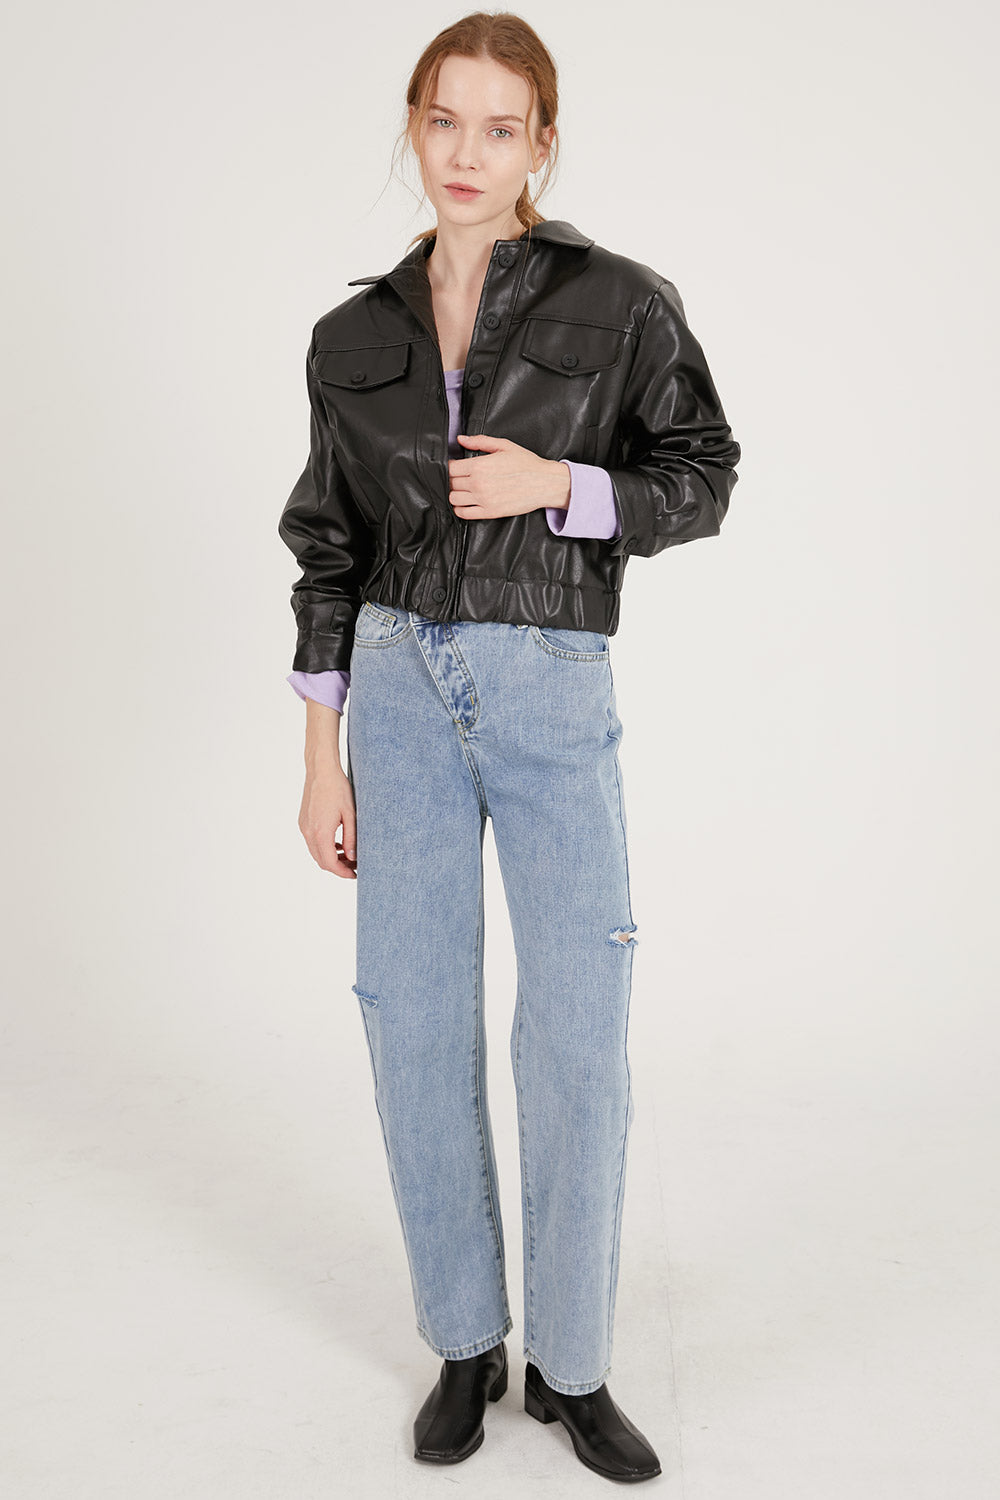 storets.com Ariana Wrap Front Fly Wide Leg Jeans